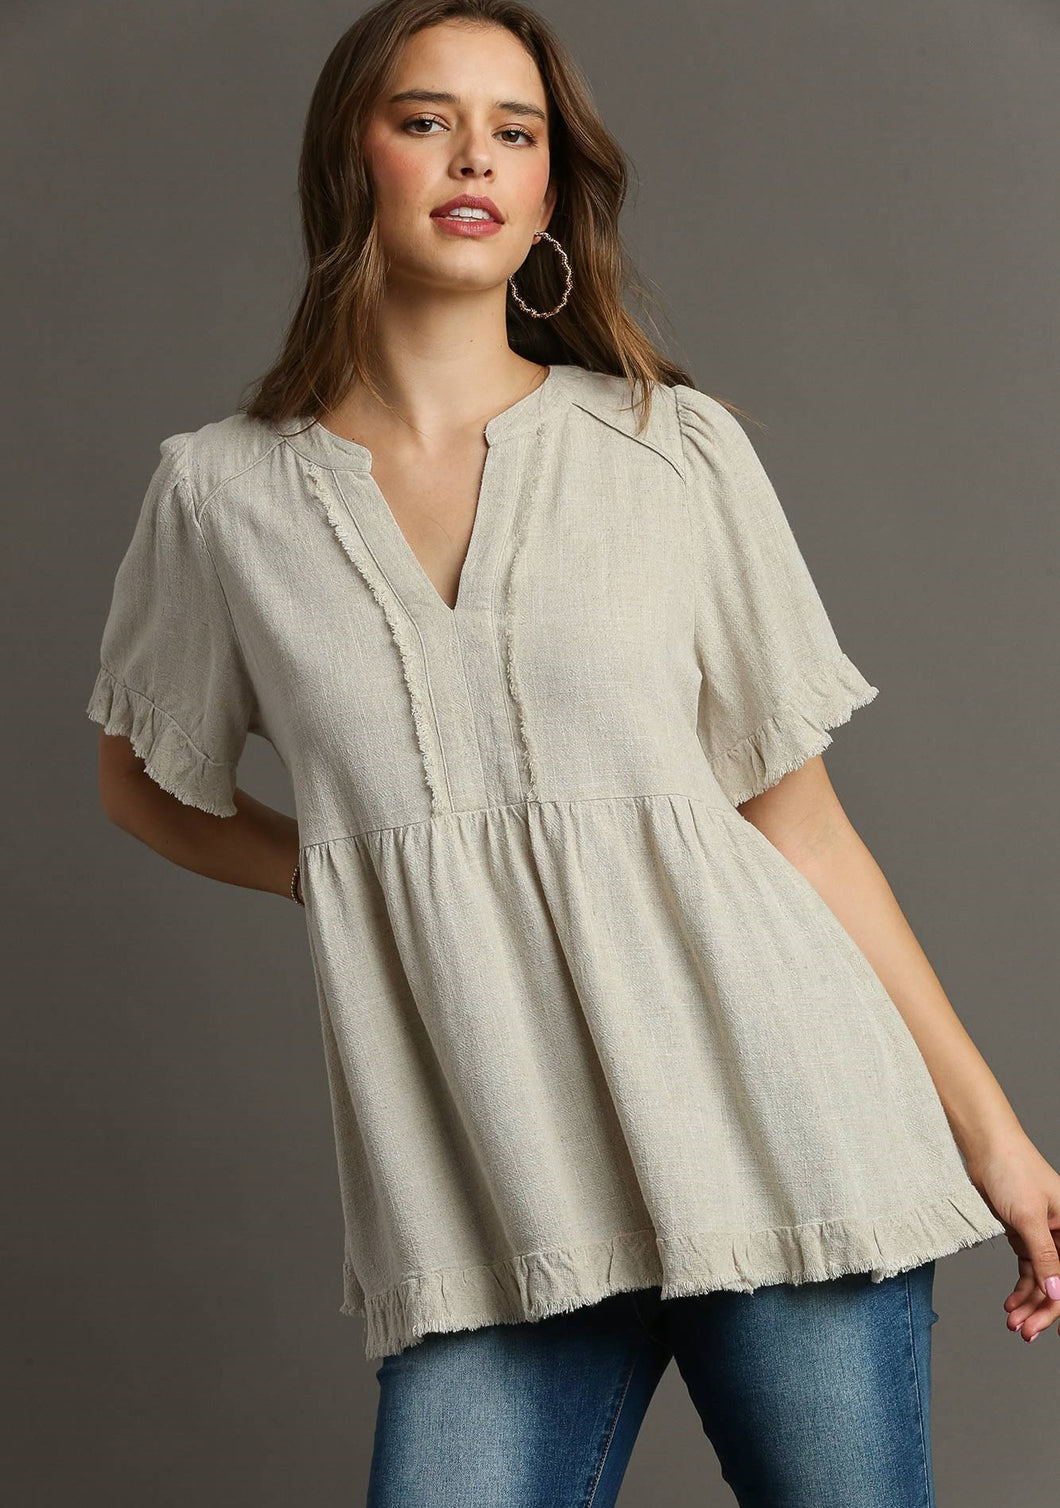 Umgee Solid Color Linen Blend Pleated Top in Oatmeal Shirts & Tops Umgee   